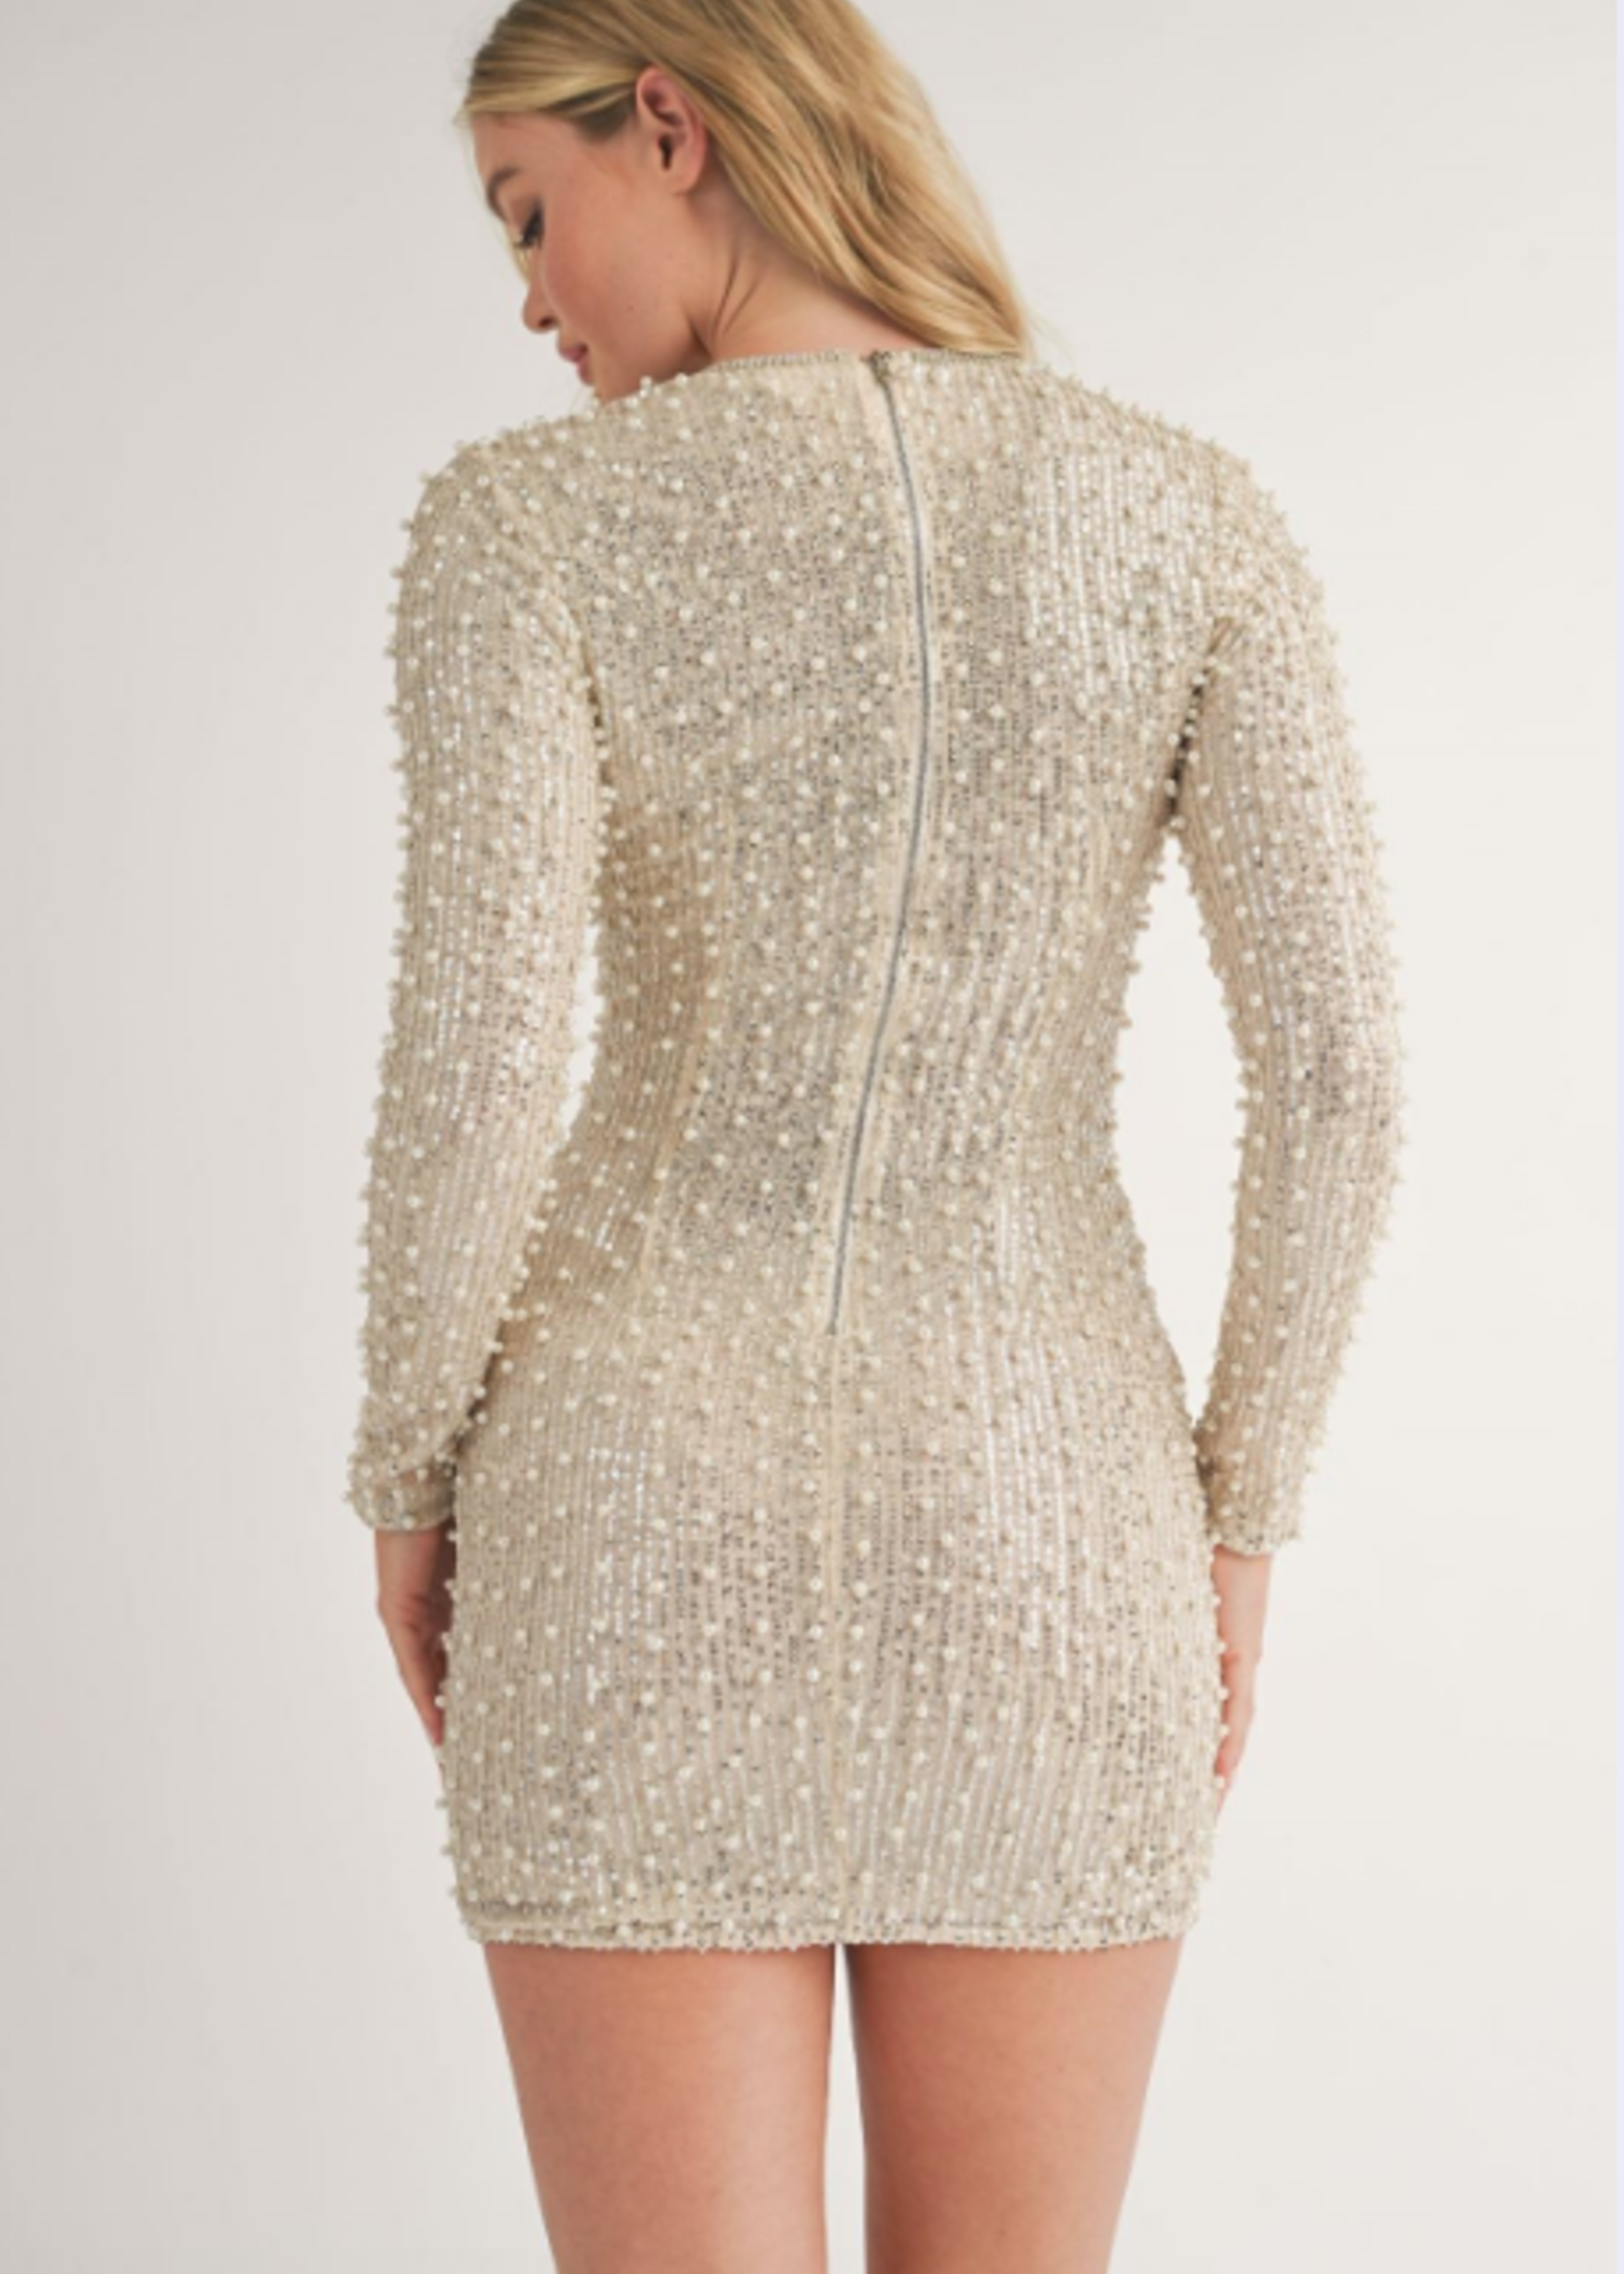 Pearl and Sequin Party Dress